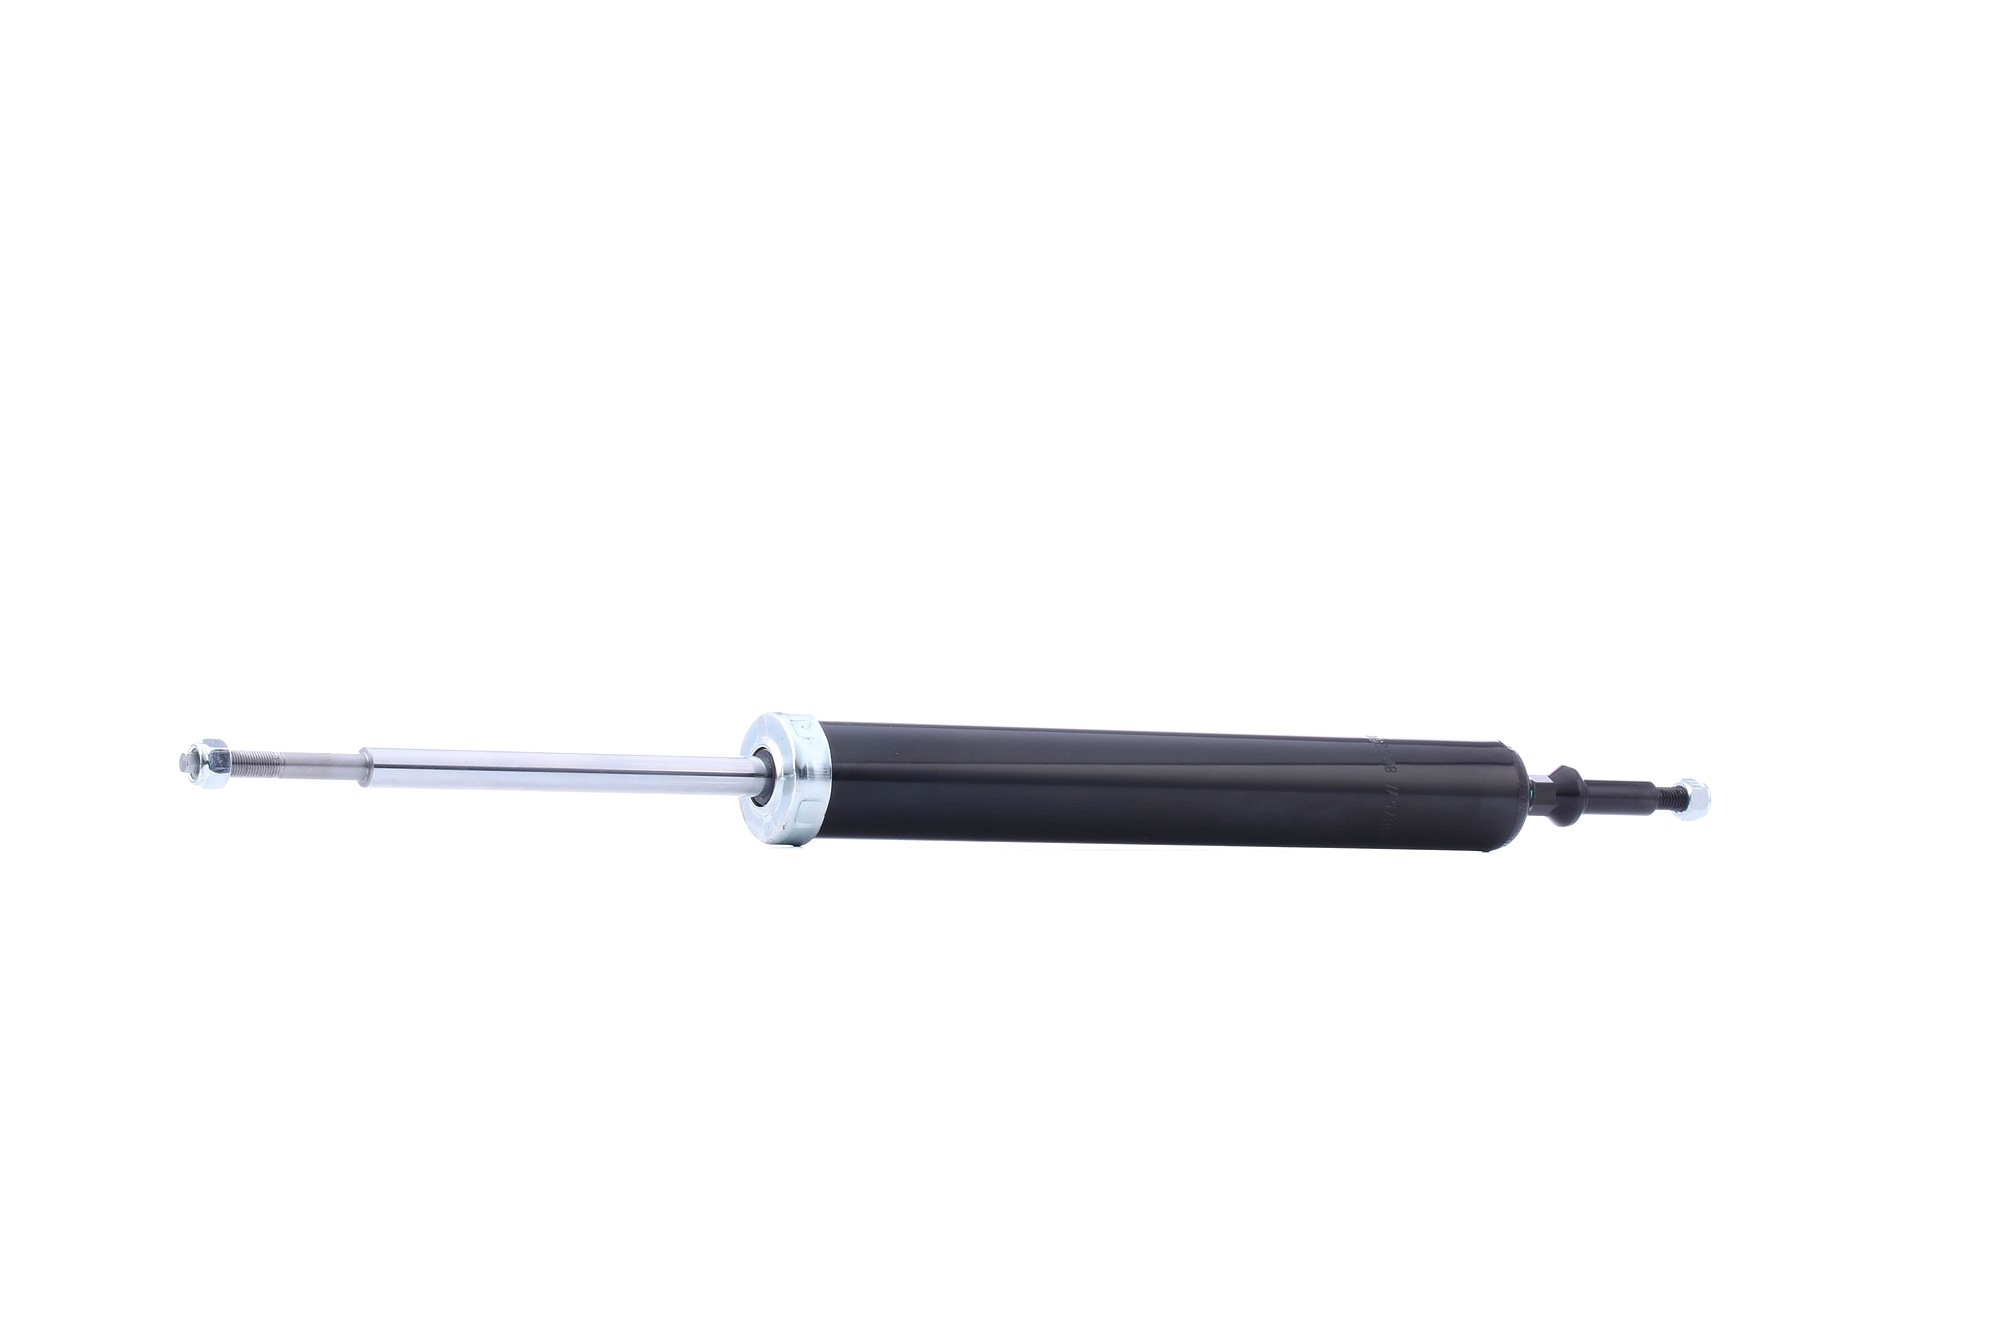 RIDEX 854S0841 Shock absorber Rear Axle, Gas Pressure, Twin-Tube, Telescopic Shock Absorber, Top pin, Bottom Pin